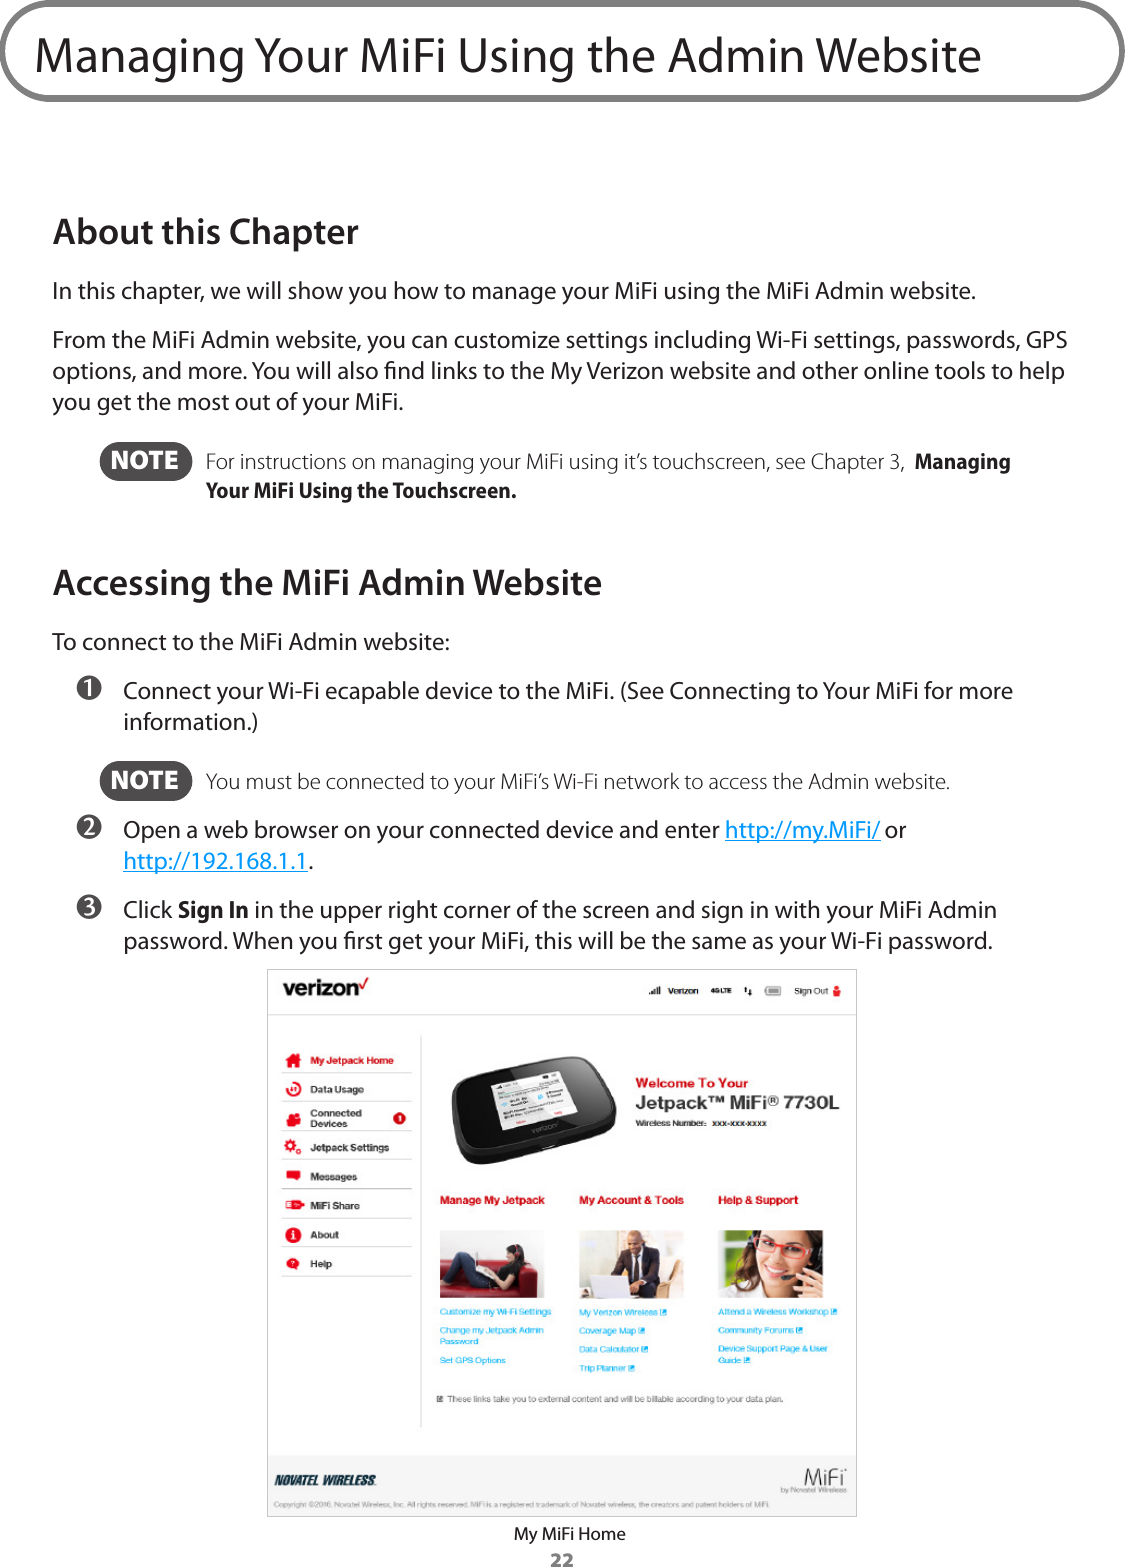 22Managing Your MiFi Using the Admin WebsiteAbout this ChapterIn this chapter, we will show you how to manage your MiFi using the MiFi Admin website. From the MiFi Admin website, you can customize settings including Wi-Fi settings, passwords, GPS options, and more. You will also nd links to the My Verizon website and other online tools to help you get the most out of your MiFi.  NOTE   For instructions on managing your MiFi using it’s touchscreen, see Chapter 3,  Managing Your MiFi Using the Touchscreen.Accessing the MiFi Admin WebsiteTo connect to the MiFi Admin website: ➊ Connect your Wi-Fi ecapable device to the MiFi. (See Connecting to Your MiFi for more information.)  NOTE   You must be connected to your MiFi’s Wi-Fi network to access the Admin website. ➋ Open a web browser on your connected device and enter http://my.MiFi/ or http://192.168.1.1. ➌ Click Sign In in the upper right corner of the screen and sign in with your MiFi Admin password. When you rst get your MiFi, this will be the same as your Wi-Fi password.My MiFi Home